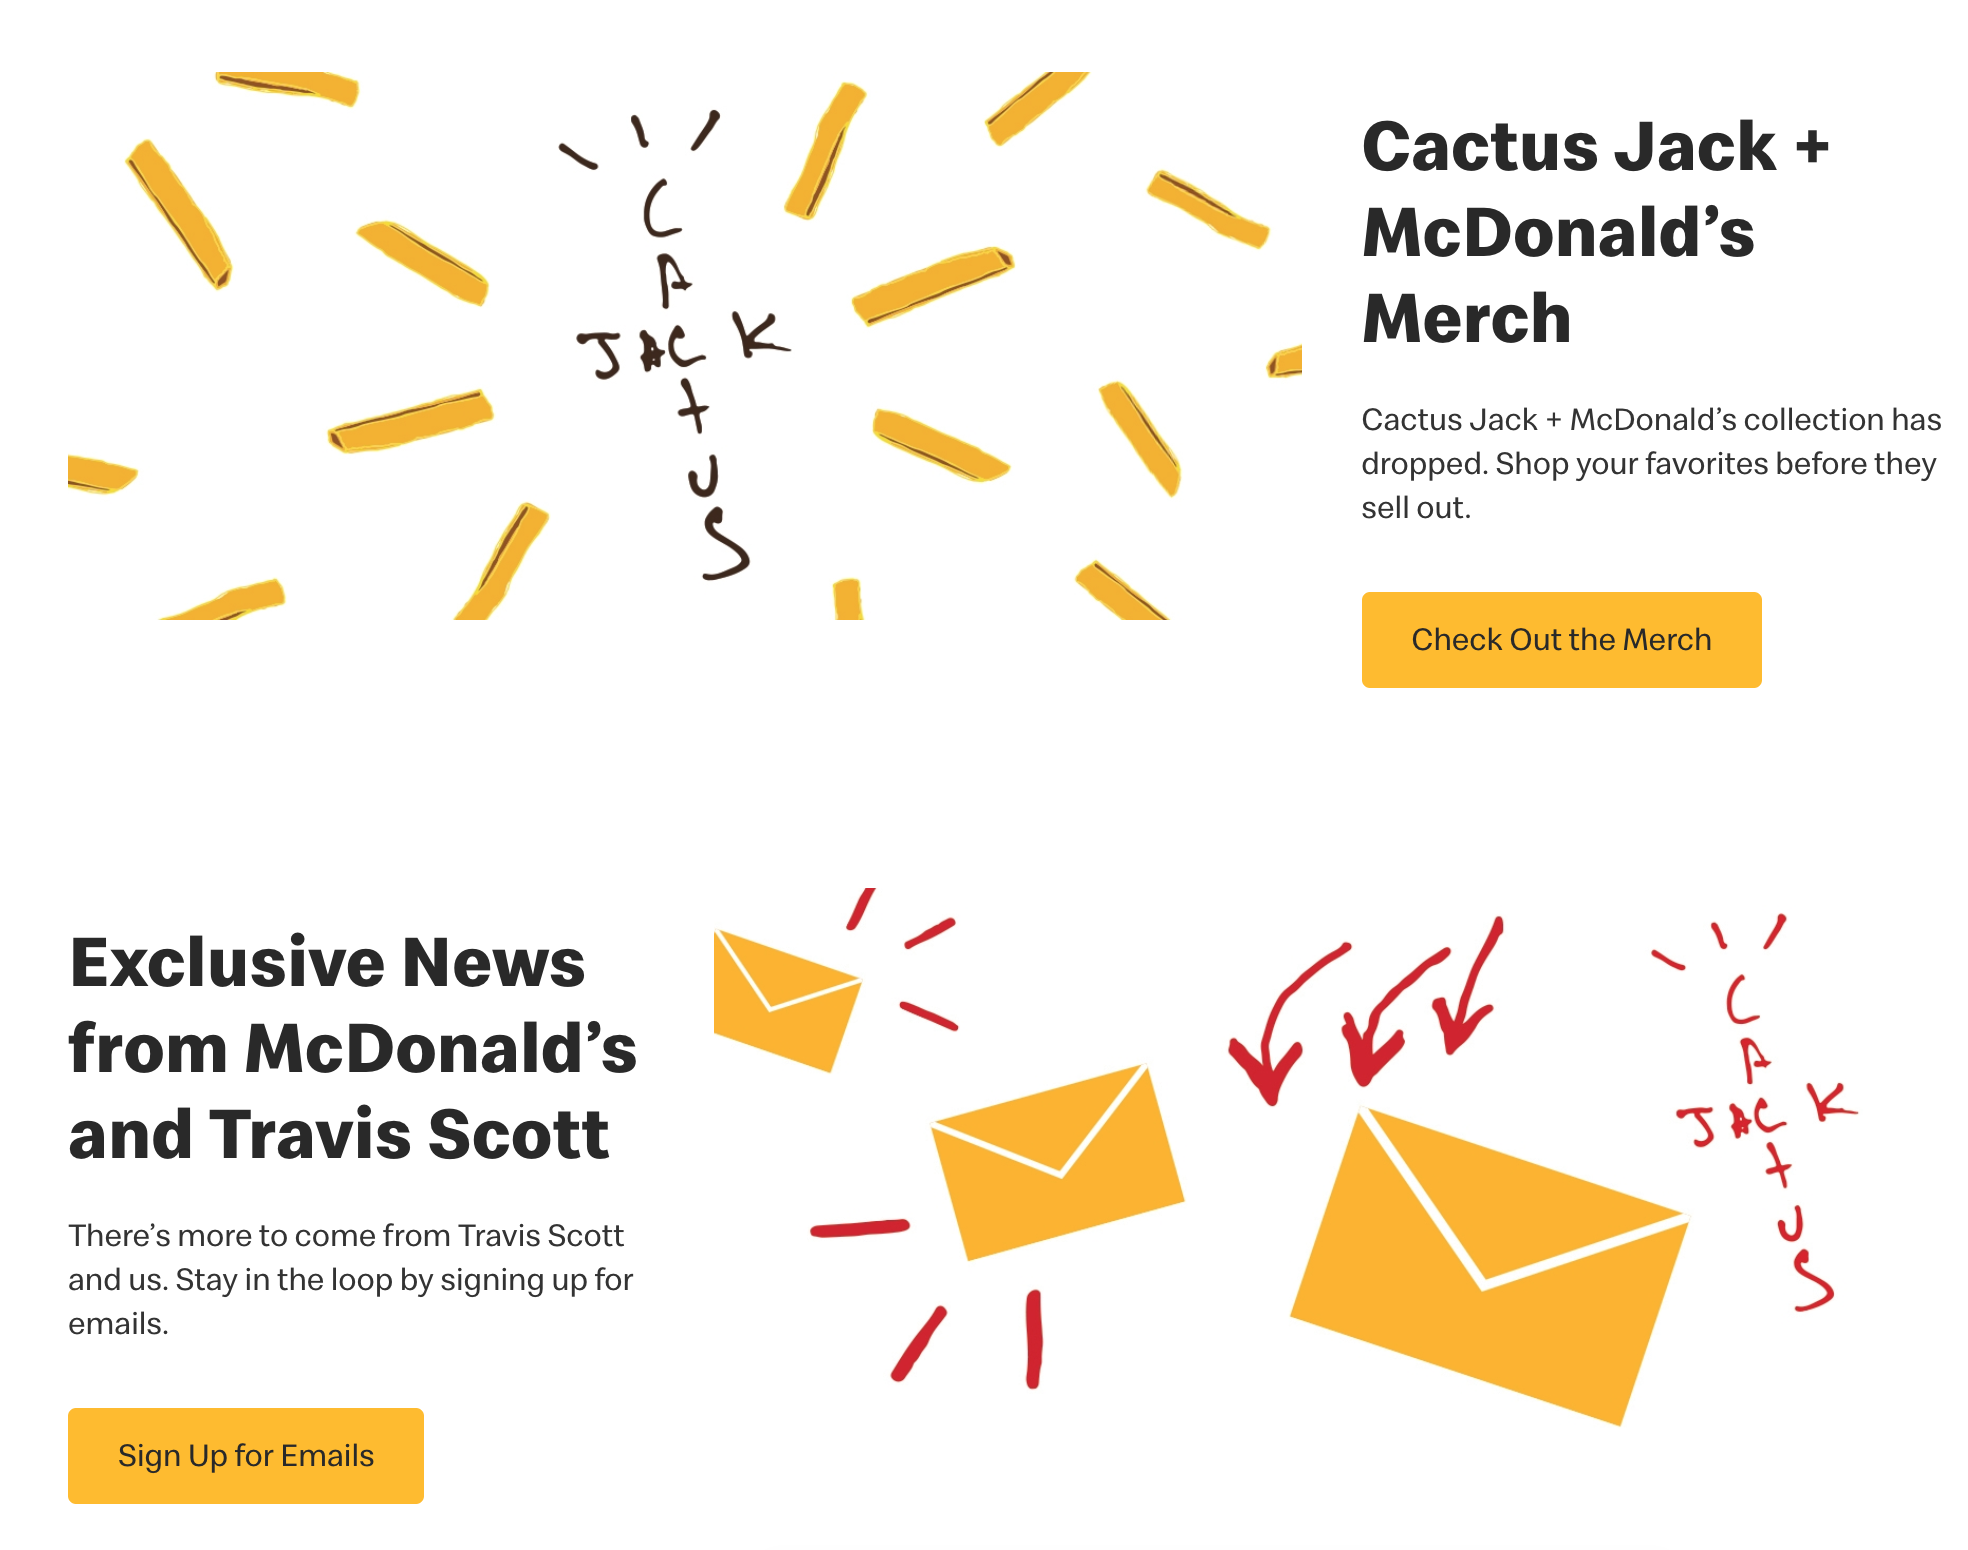 diagram - Cactus Jack McDonald's Merch octrana A Jack U Cactus Jack McDonald's collection has dropped. Shop your favorites before they sell out Check out the Merch ror Exclusive News from McDonald's and Travis Scott There's more to come from Travis Scott 